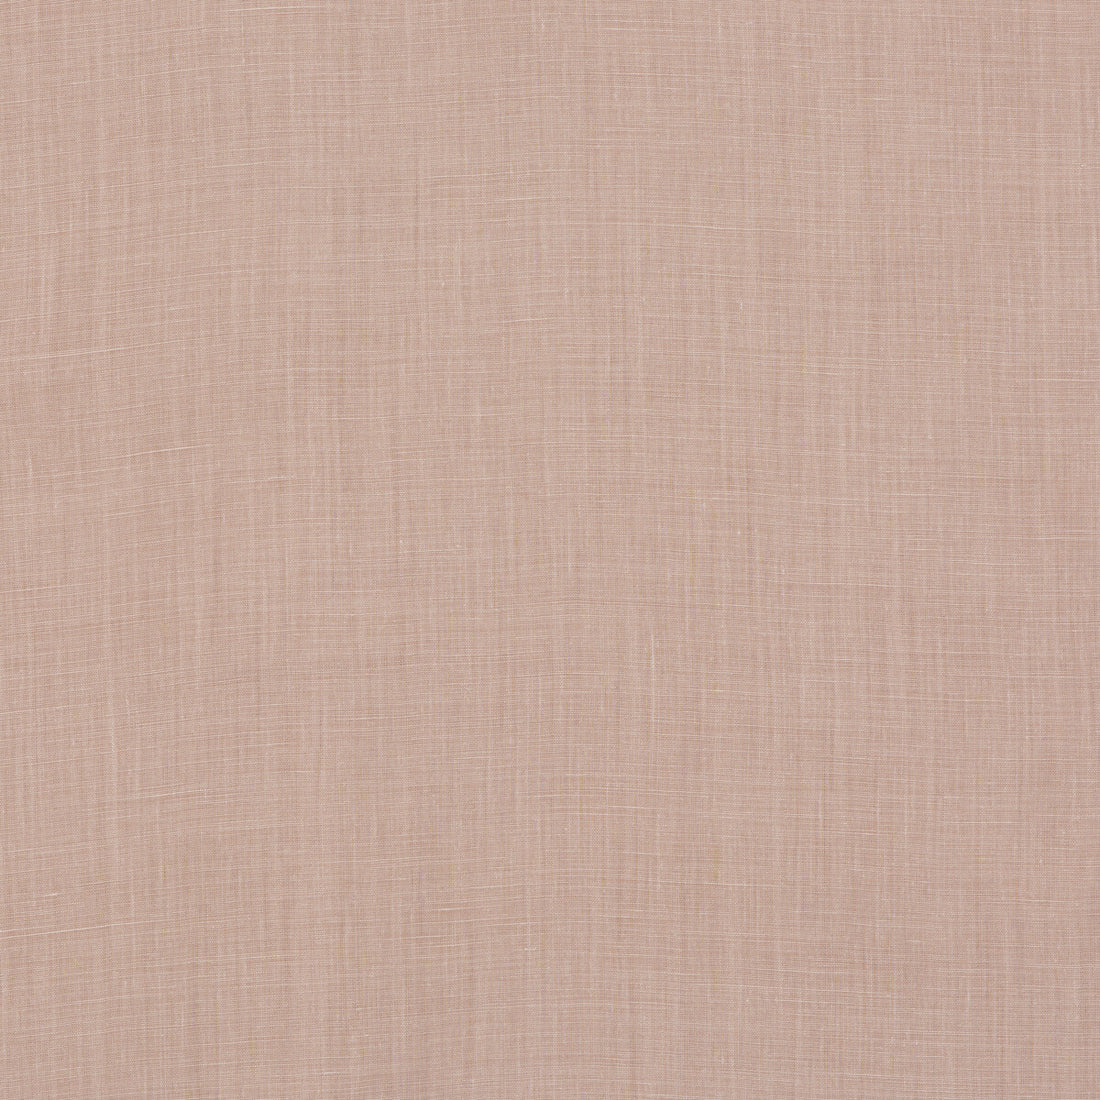 Baker House Linen fabric in blush color - pattern BF10961.440.0 - by G P &amp; J Baker in the Baker House Linens collection